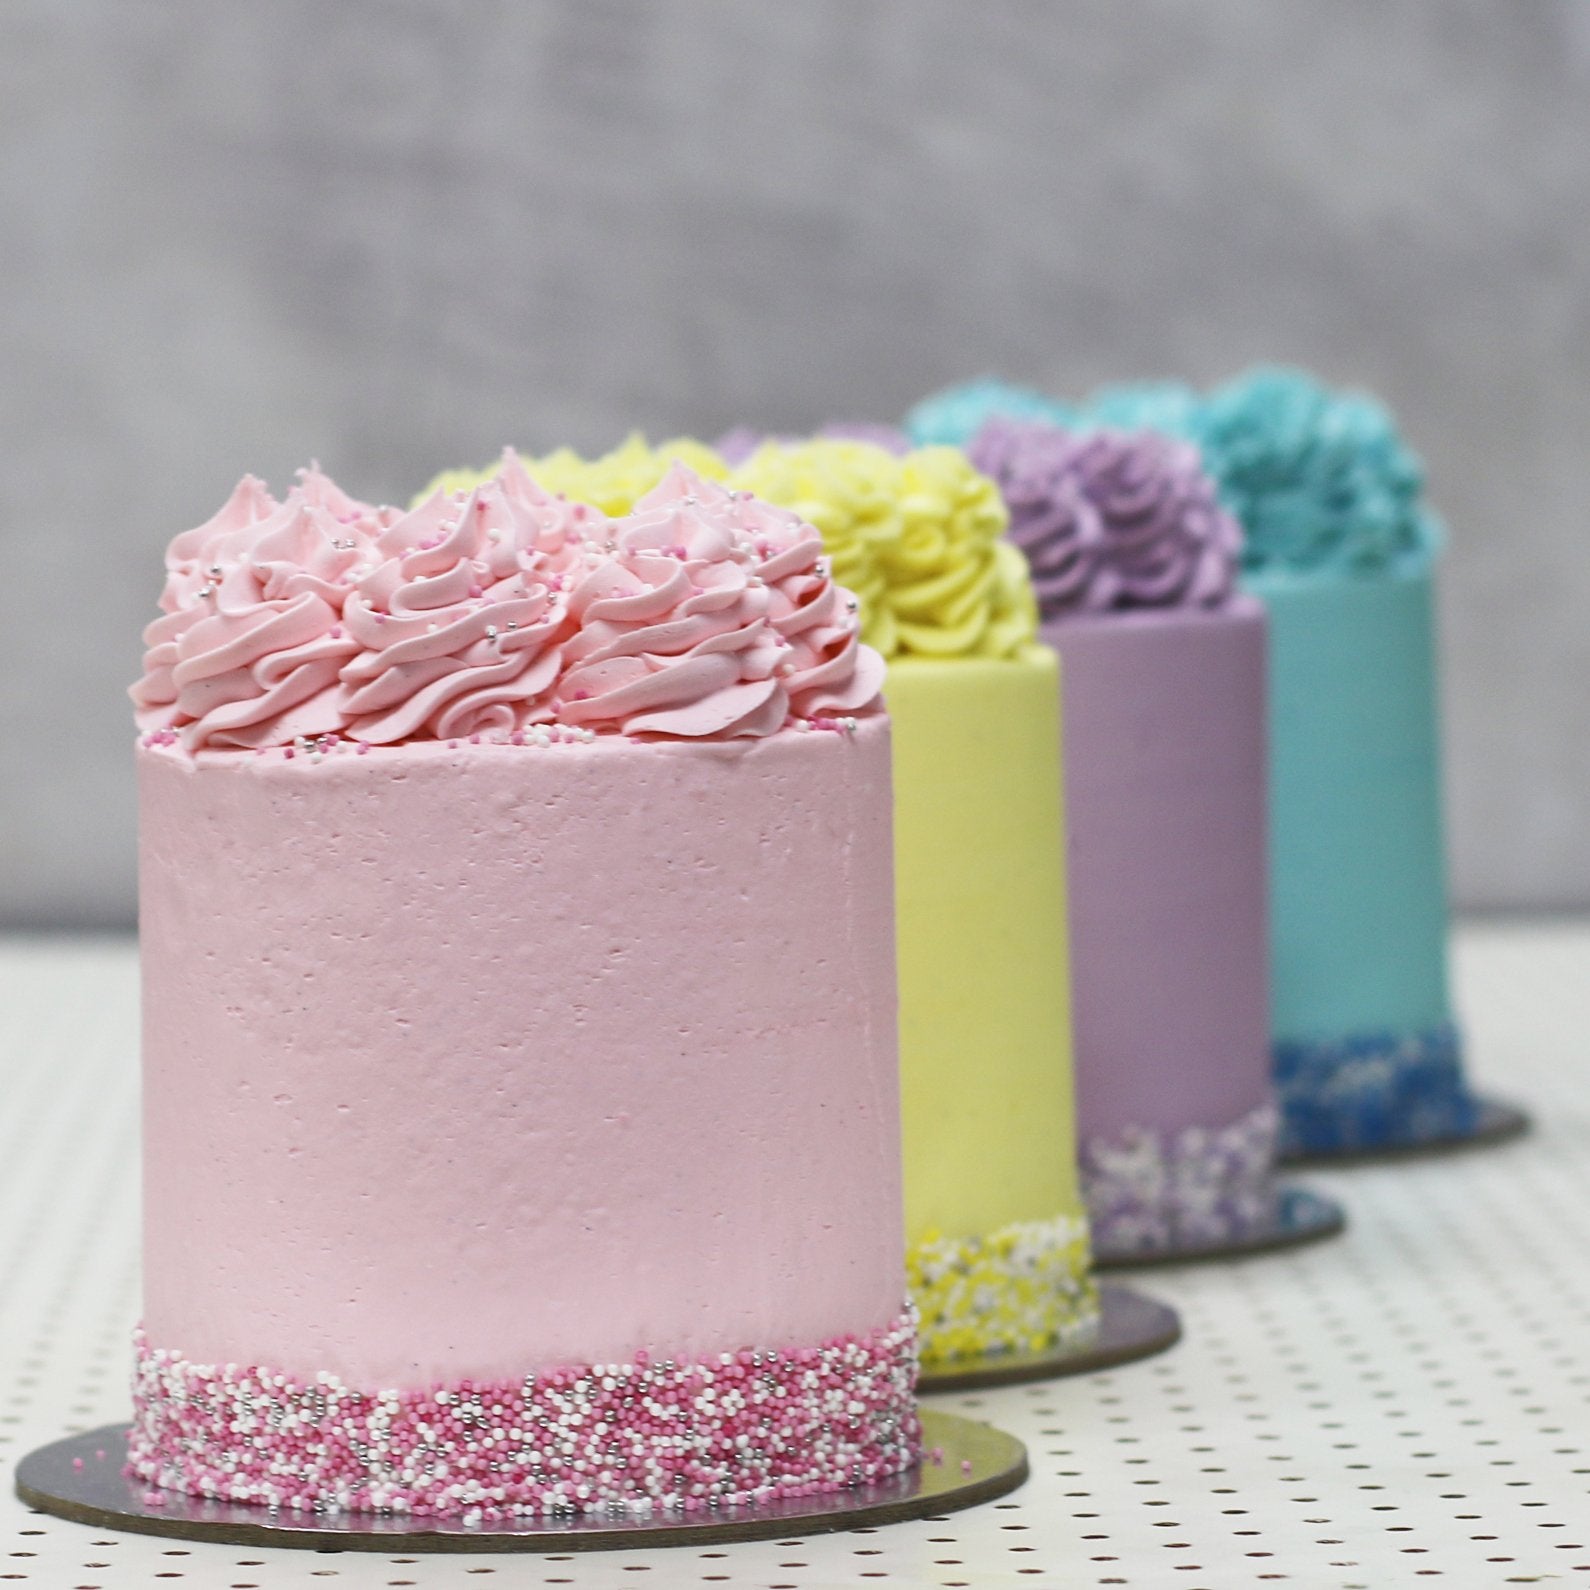 BABY SHOWER CAKE – THE CHEF PATISSIER